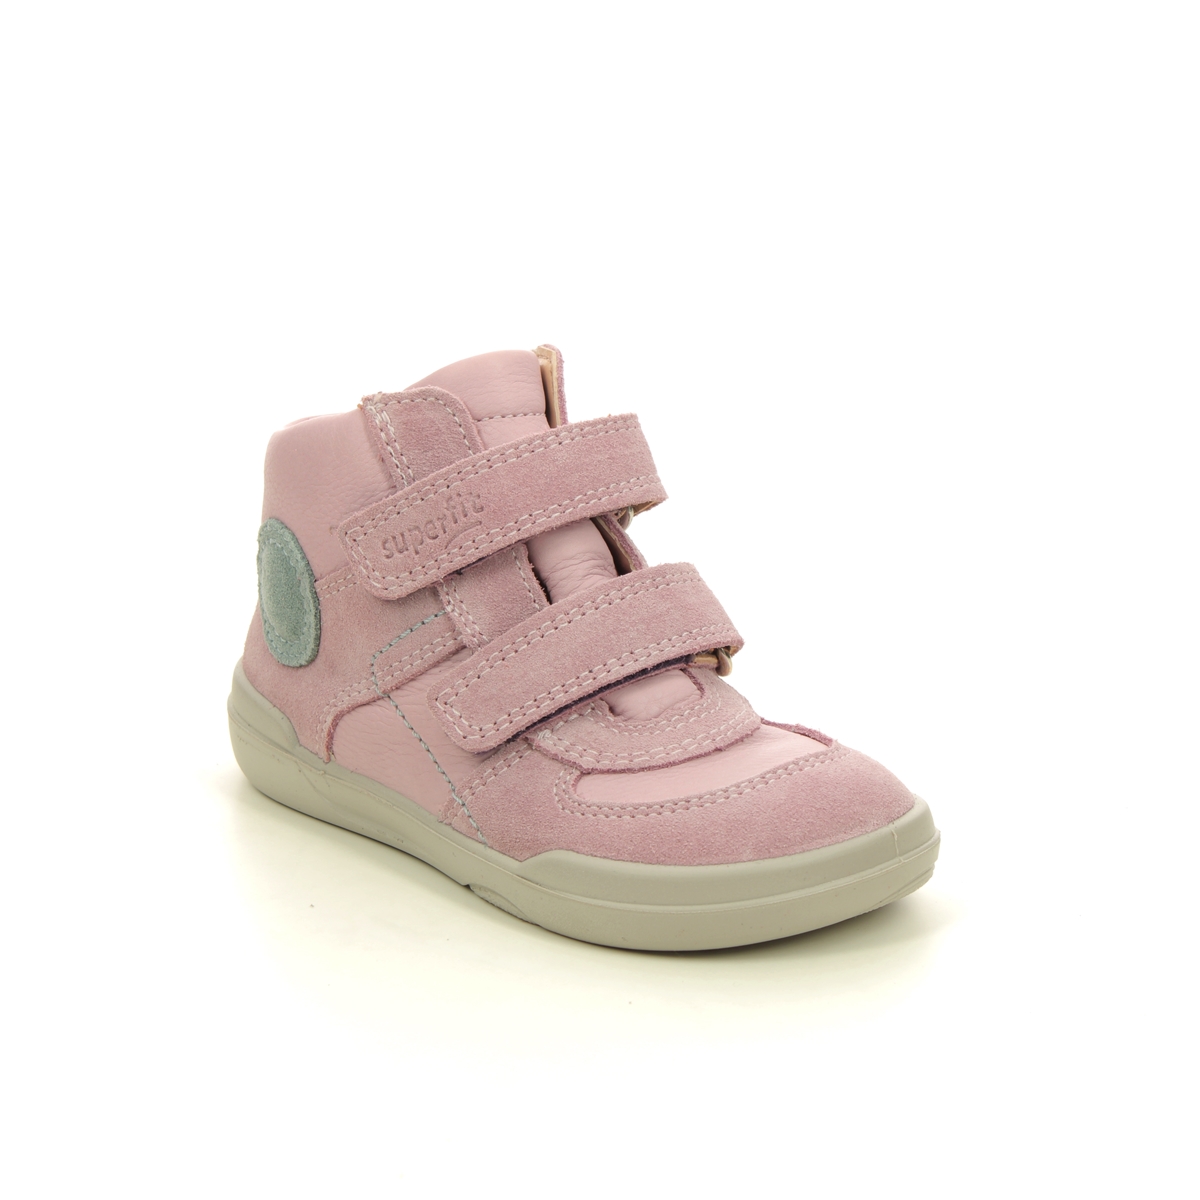 Superfit Superfree Gtx Pink Suede Kids Toddler Girls Boots 1000541-5500 In Size 24 In Plain Pink Suede